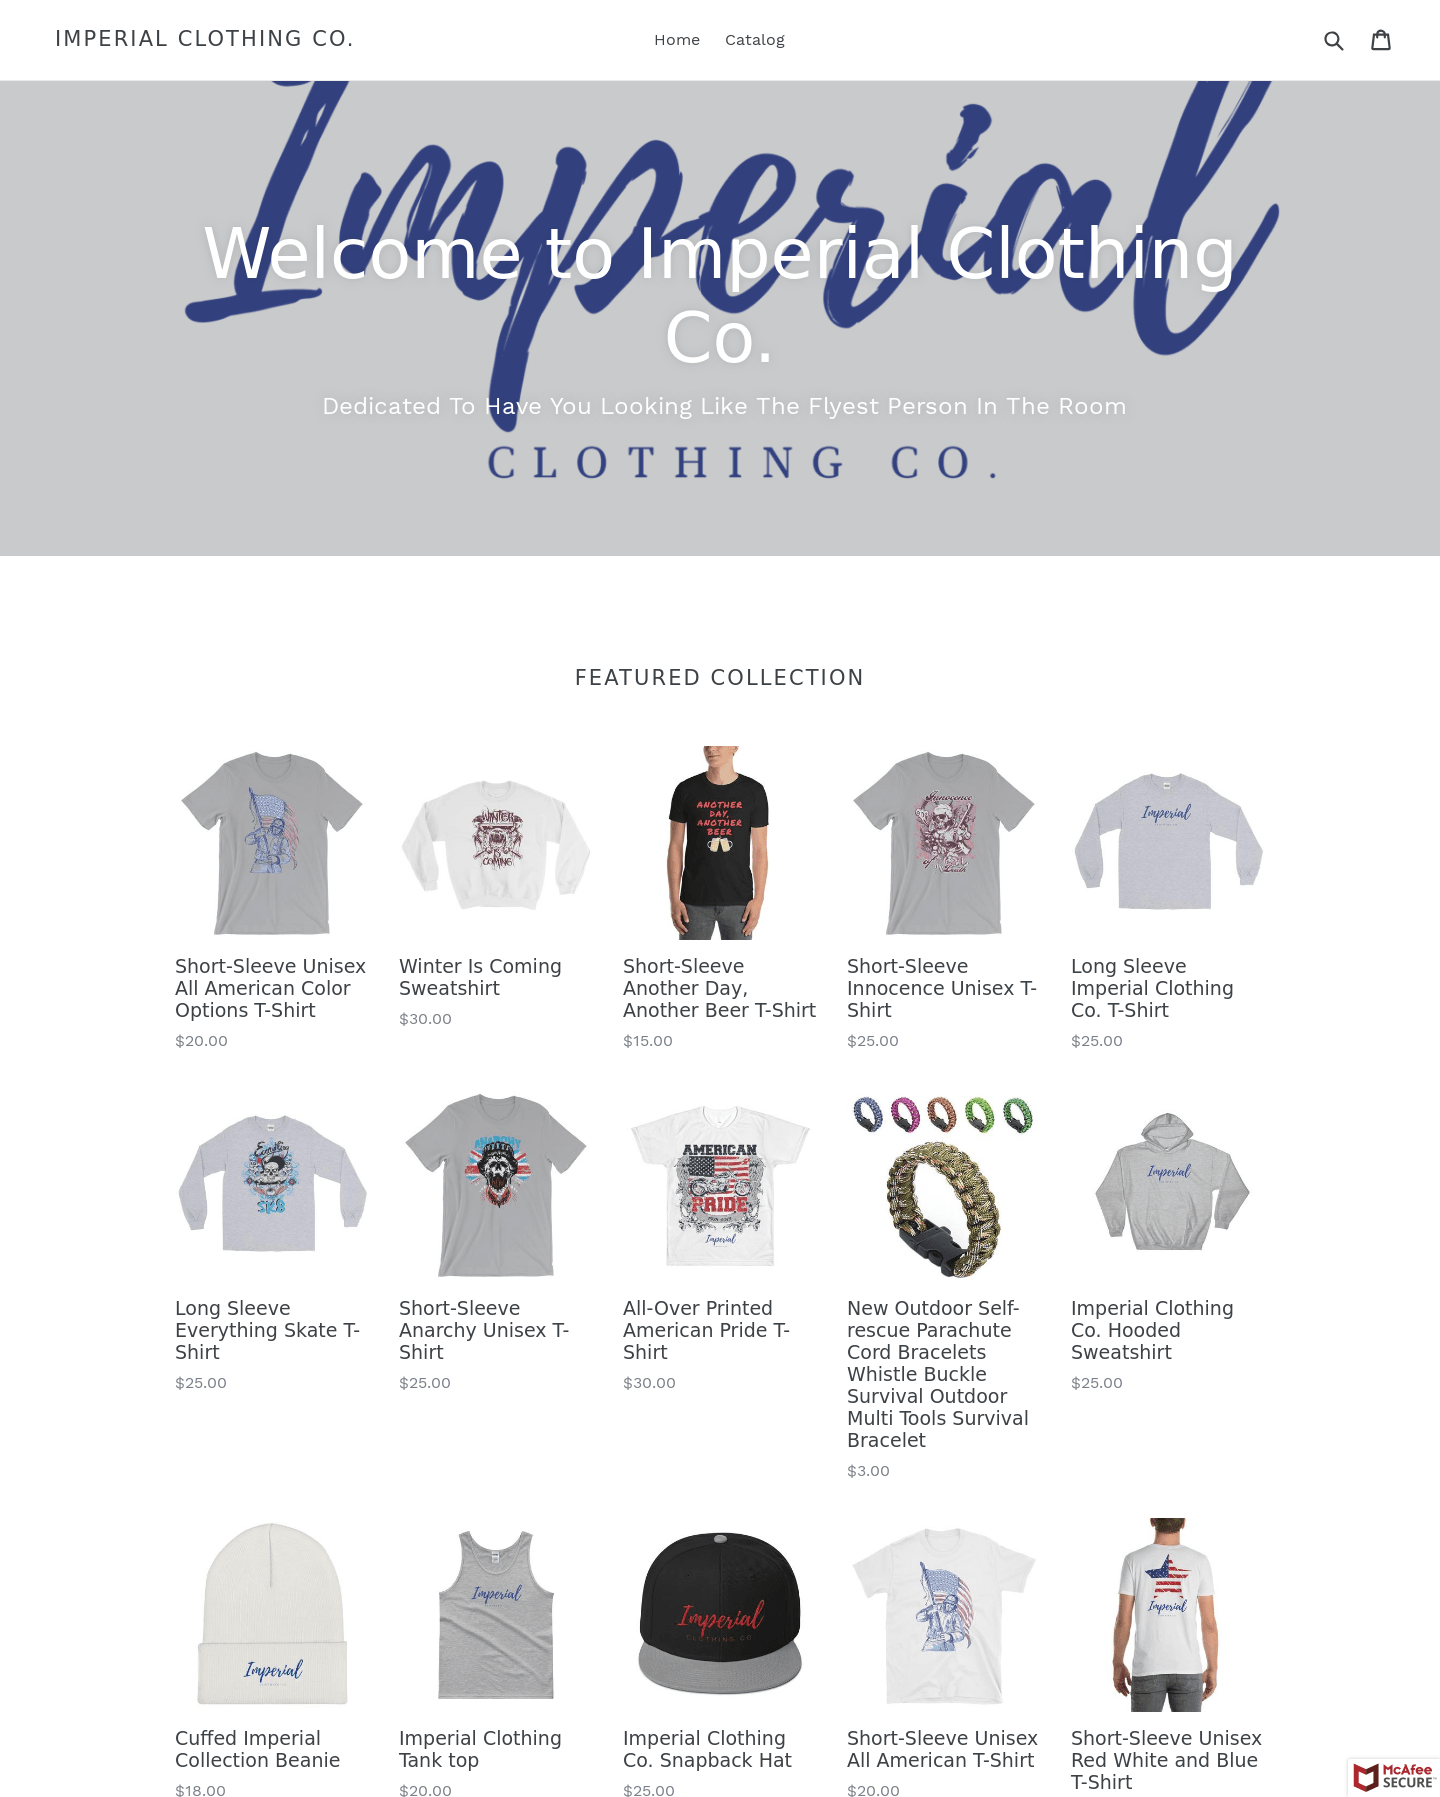 Imperial Clothing Logo - Imperial Clothing Co. For Sale | Buy an Online Business